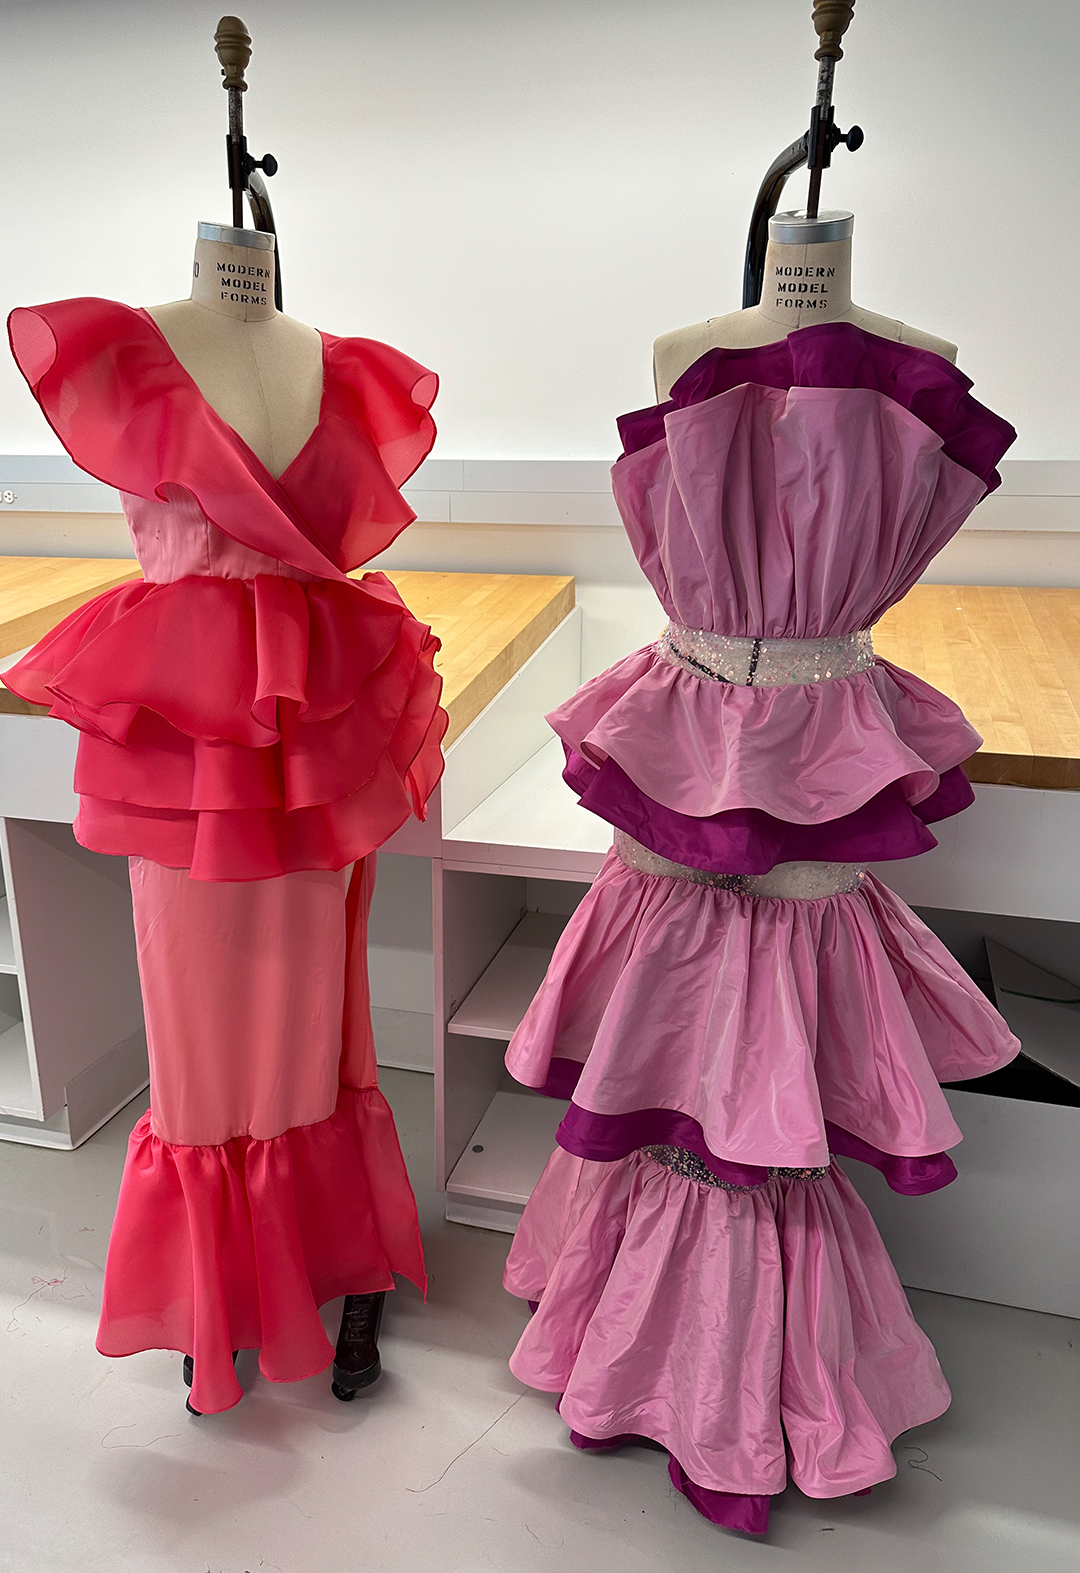 Salmon and peach layered ruffled dress and a 3 tiered double pink + purple ruffled dress with crumbcatcher bodice & beaded skirt.